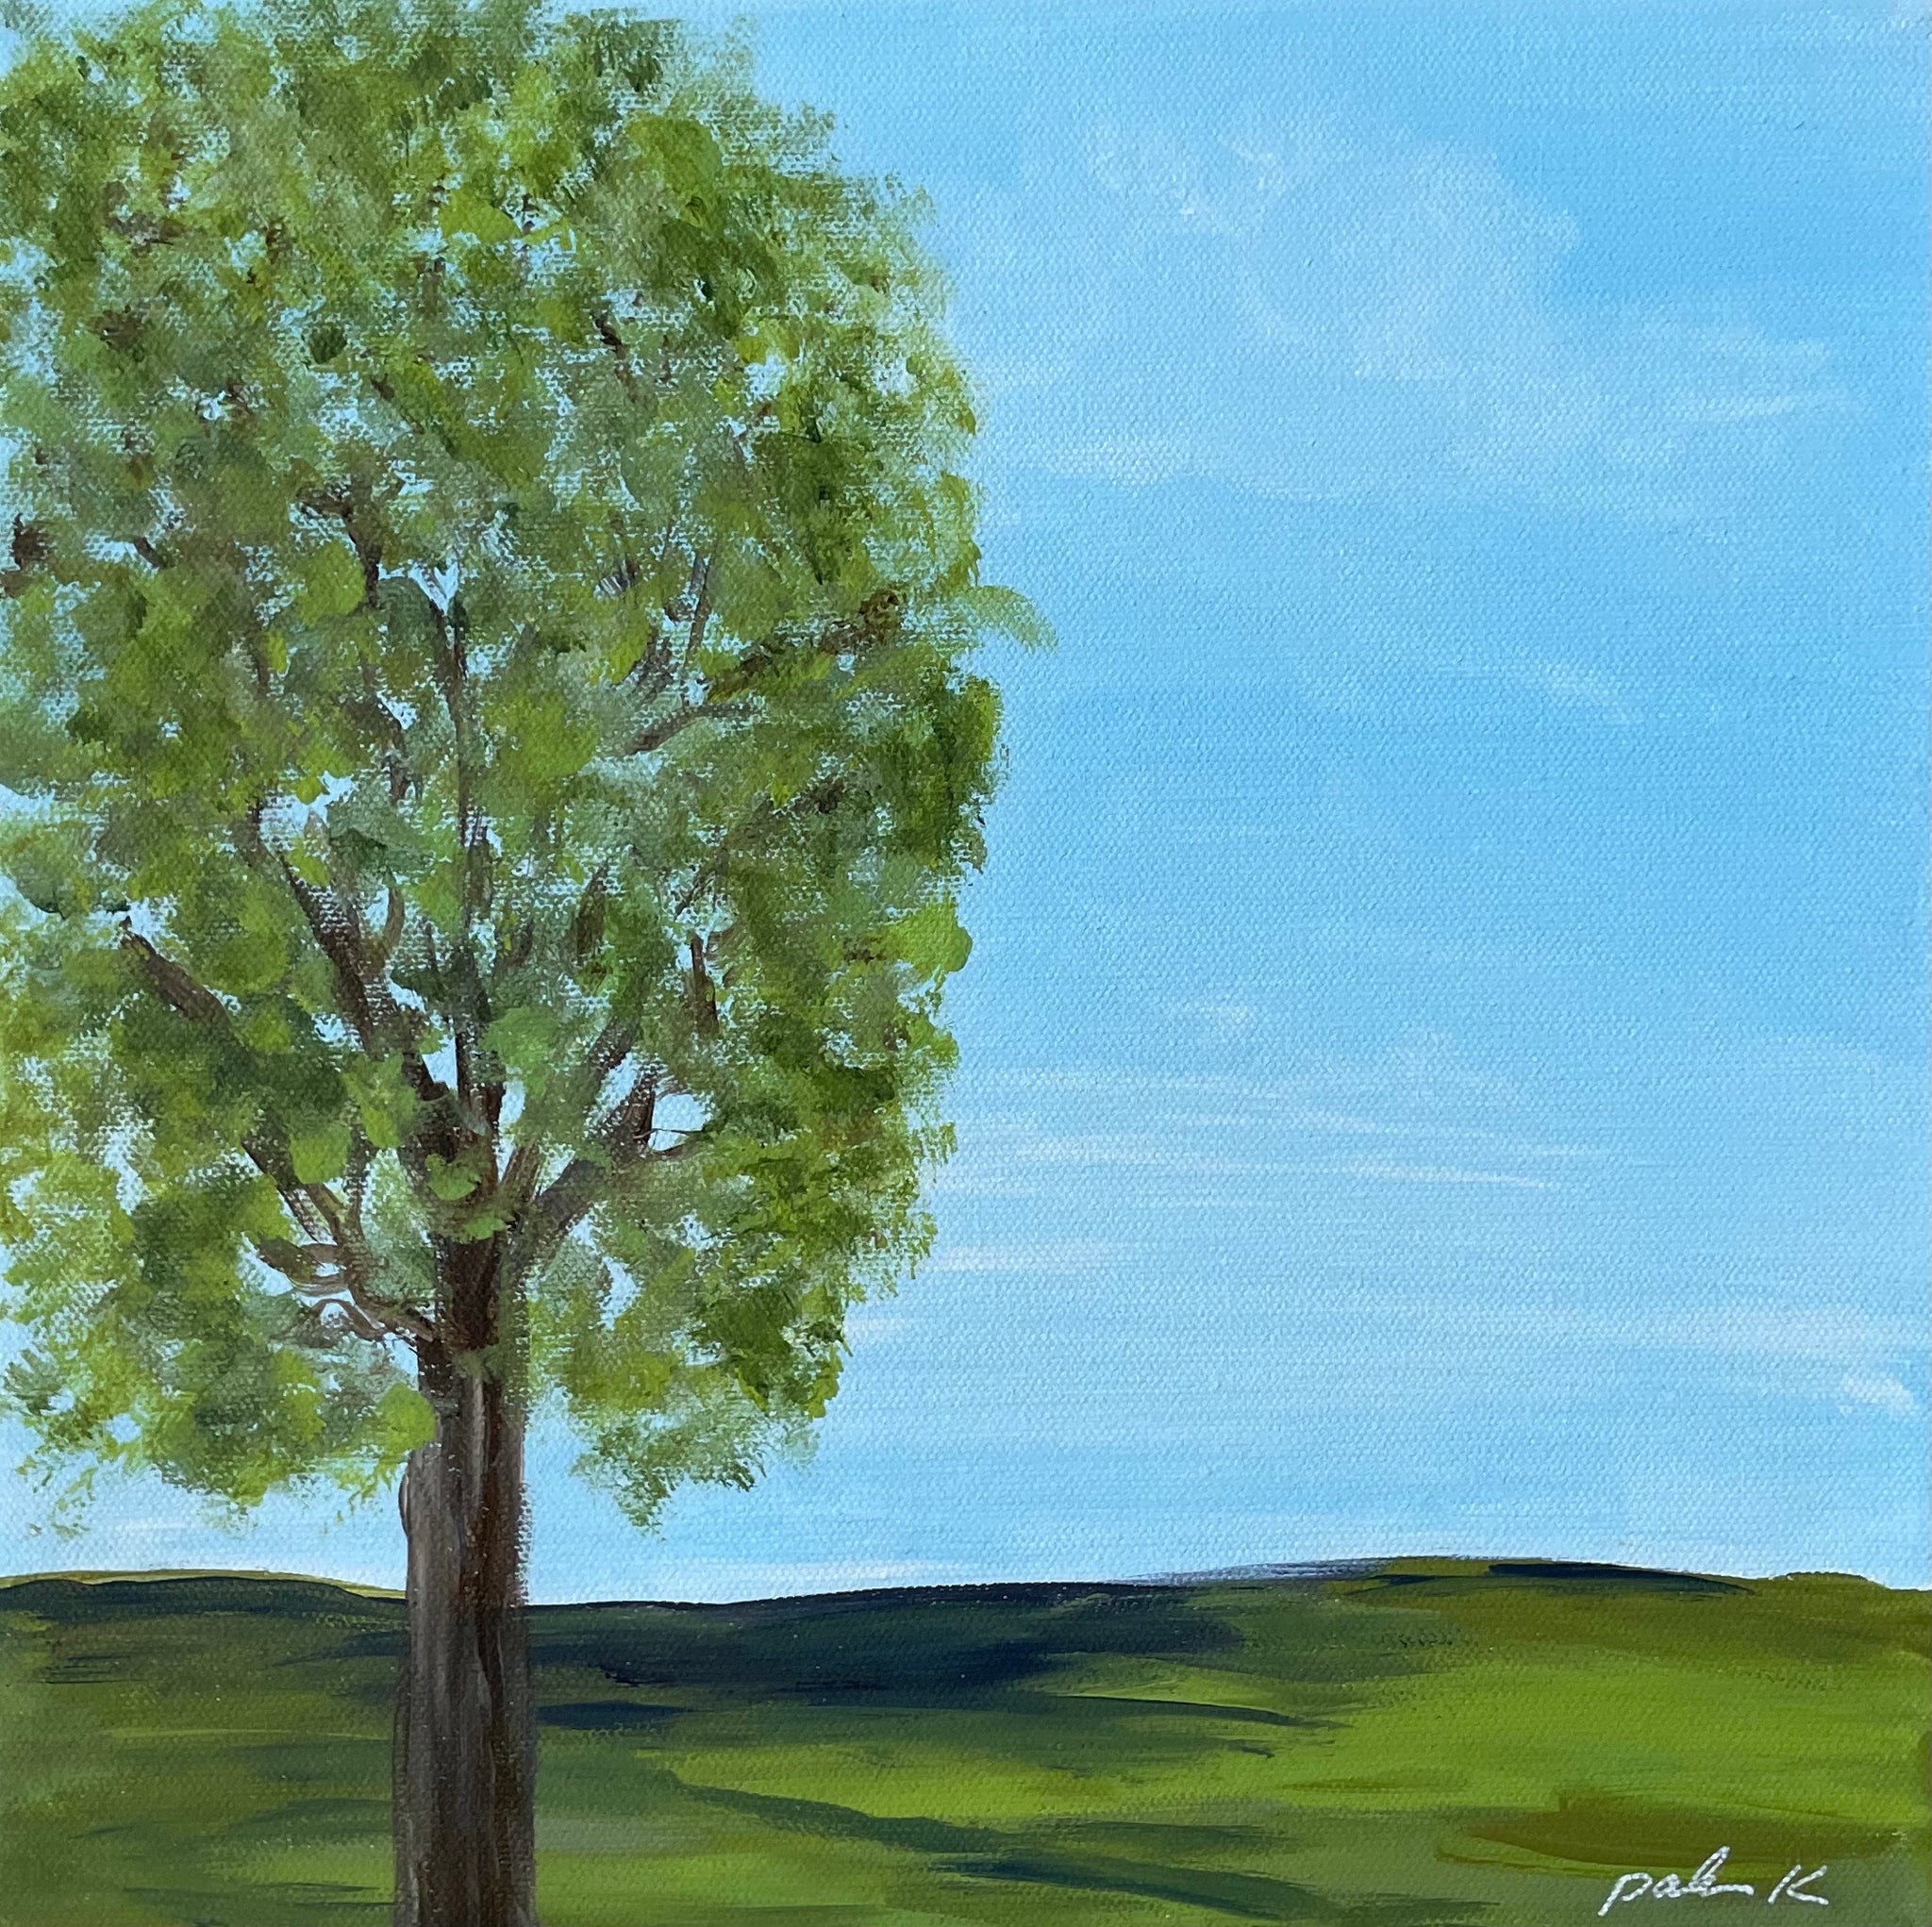 painting of single green leafed tree in field with horizon and blue sky 12 x 12 acrylic on gallery wrap canvas in black wood float frame Signed on front, titled on back D rings and wire on back ready to hang &nbsp; All palmer K designs artwork © Karen Palmer. &nbsp;All rights reserved.